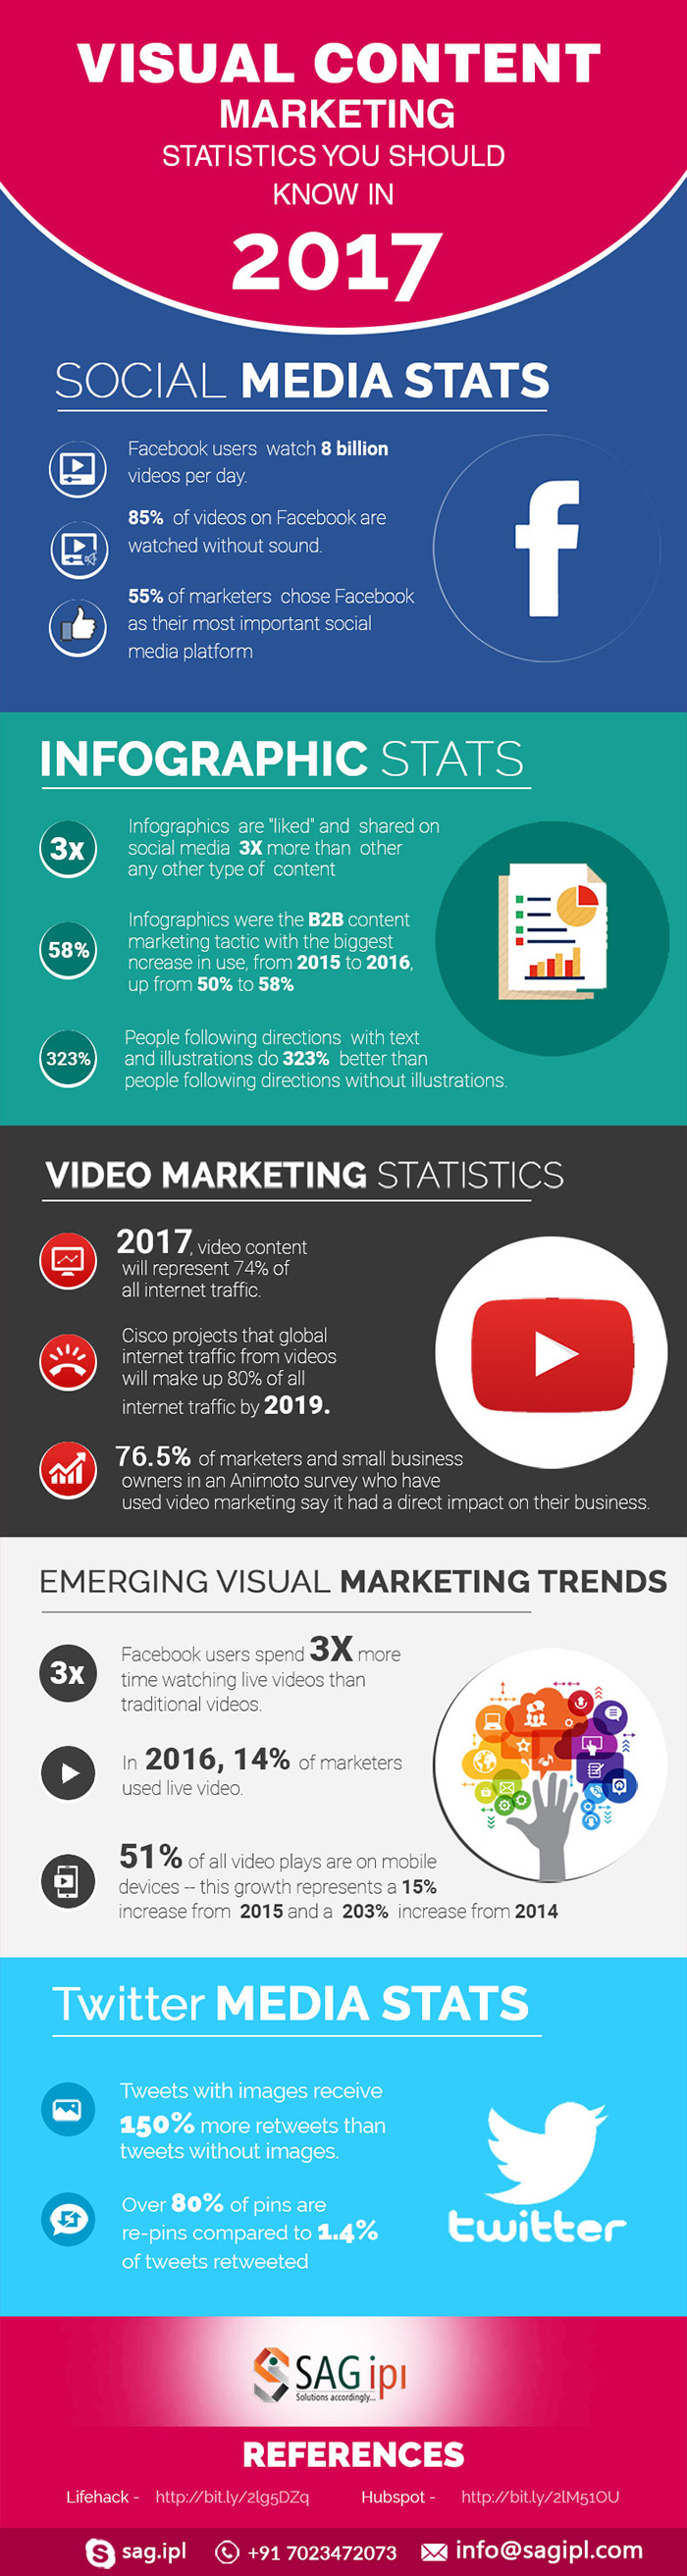 Visual Content Marketing Statistics You Should Know In 2017